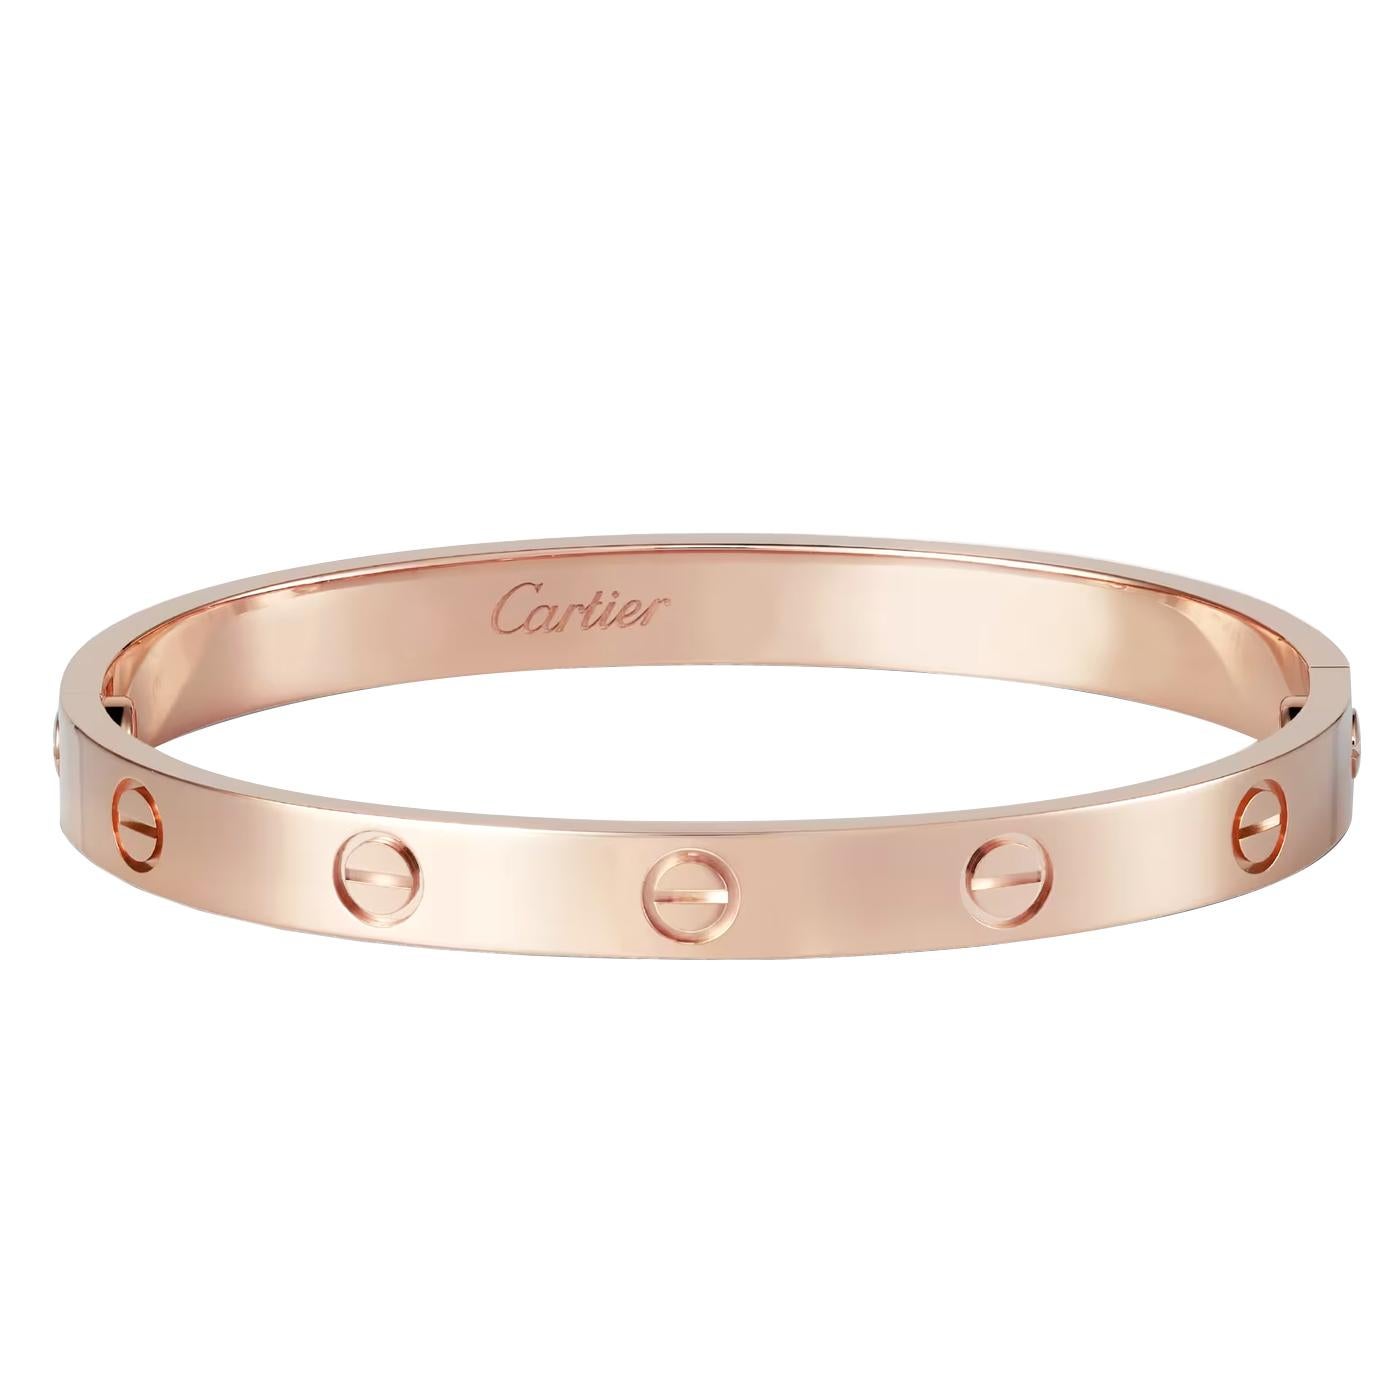 LOVE bracelet, 18K rose gold (750/1000). Comes with a screwdriver. Width: 6.1 mm. Created in New York in 1969, the LOVE bracelet is an icon of jewelry design: a close-fitting, oval bracelet composed of two rigid arcs that is worn on the wrist and